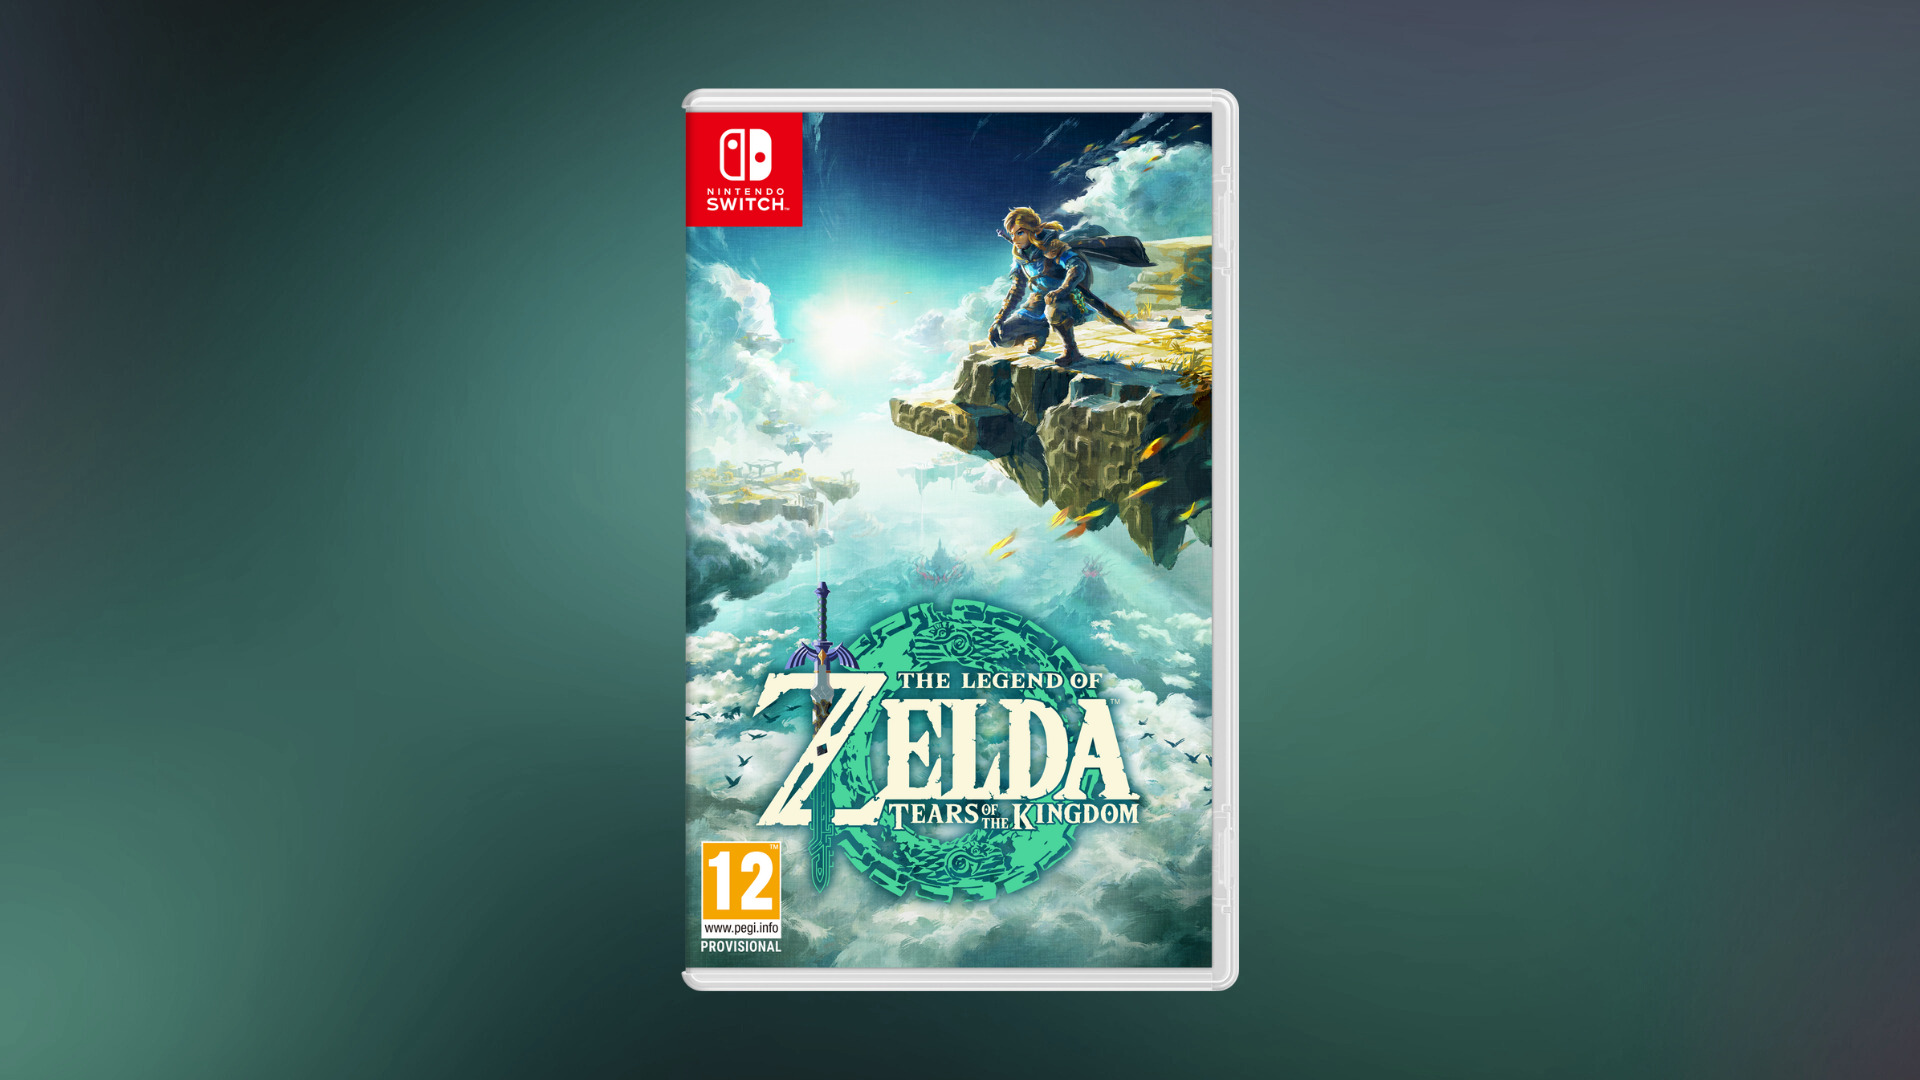 Housse Zelda Tears of the Kingdom Switch : les offres